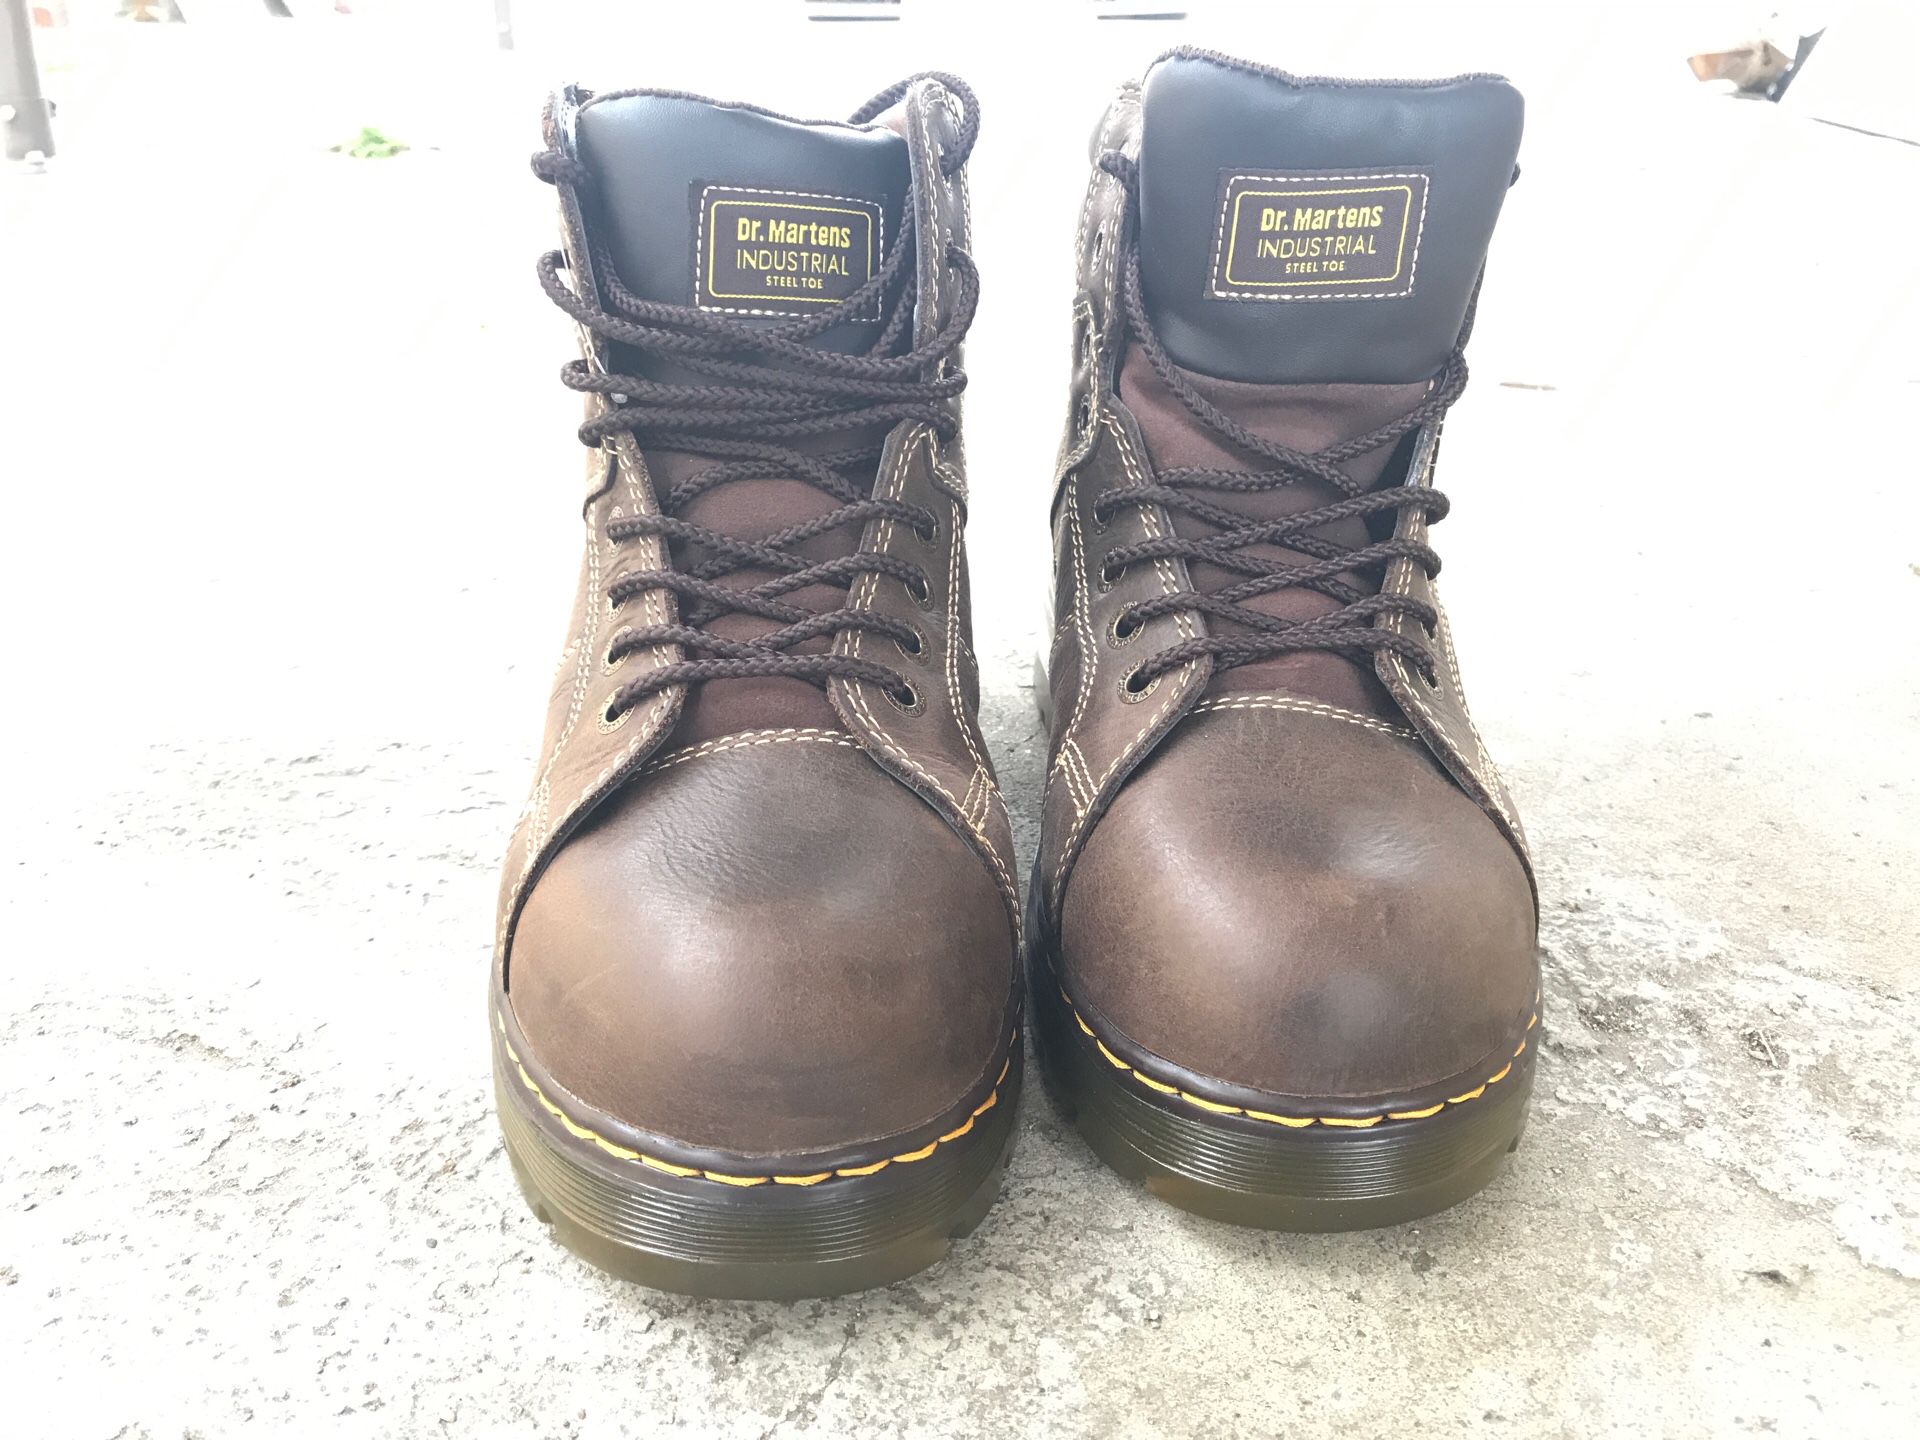 Dr. Martens Industrial Work Boots